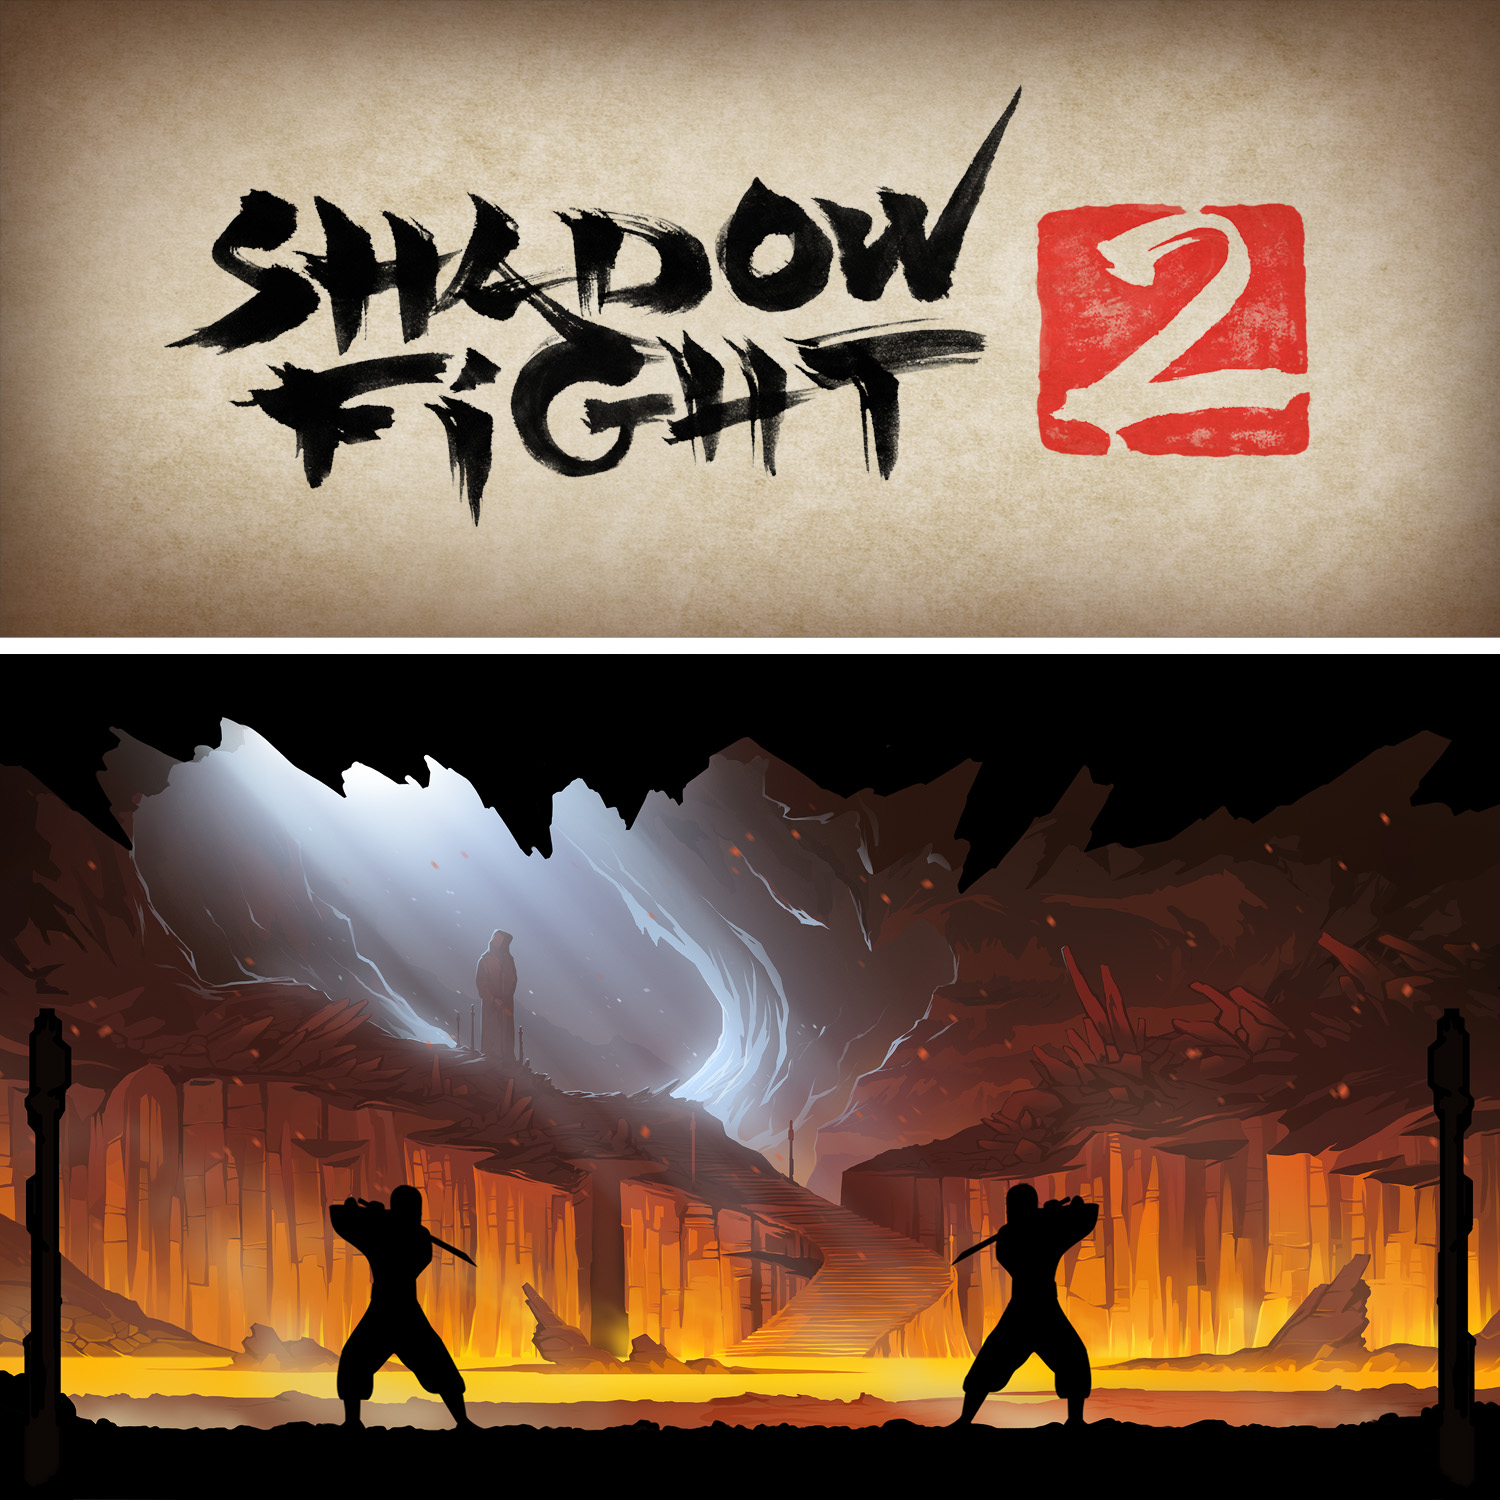 Shadow fight soundtrack